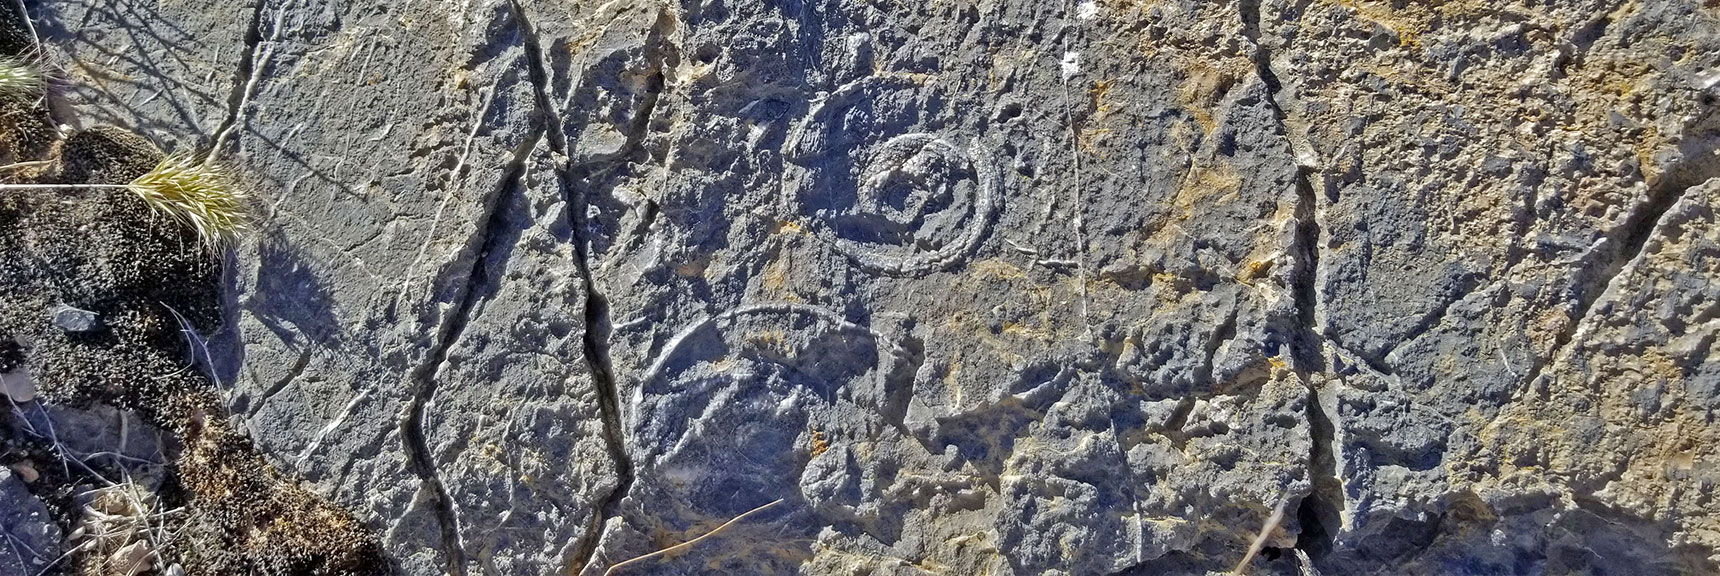 Nautilus Fossils Embedded in Dark Rock from Cretaceous Period (250 Million Years) to Ordovician Period (450 Million Years) | Fossil Ridge End to End | Sheep Range | Desert National Wildlife Refuge, Nevada